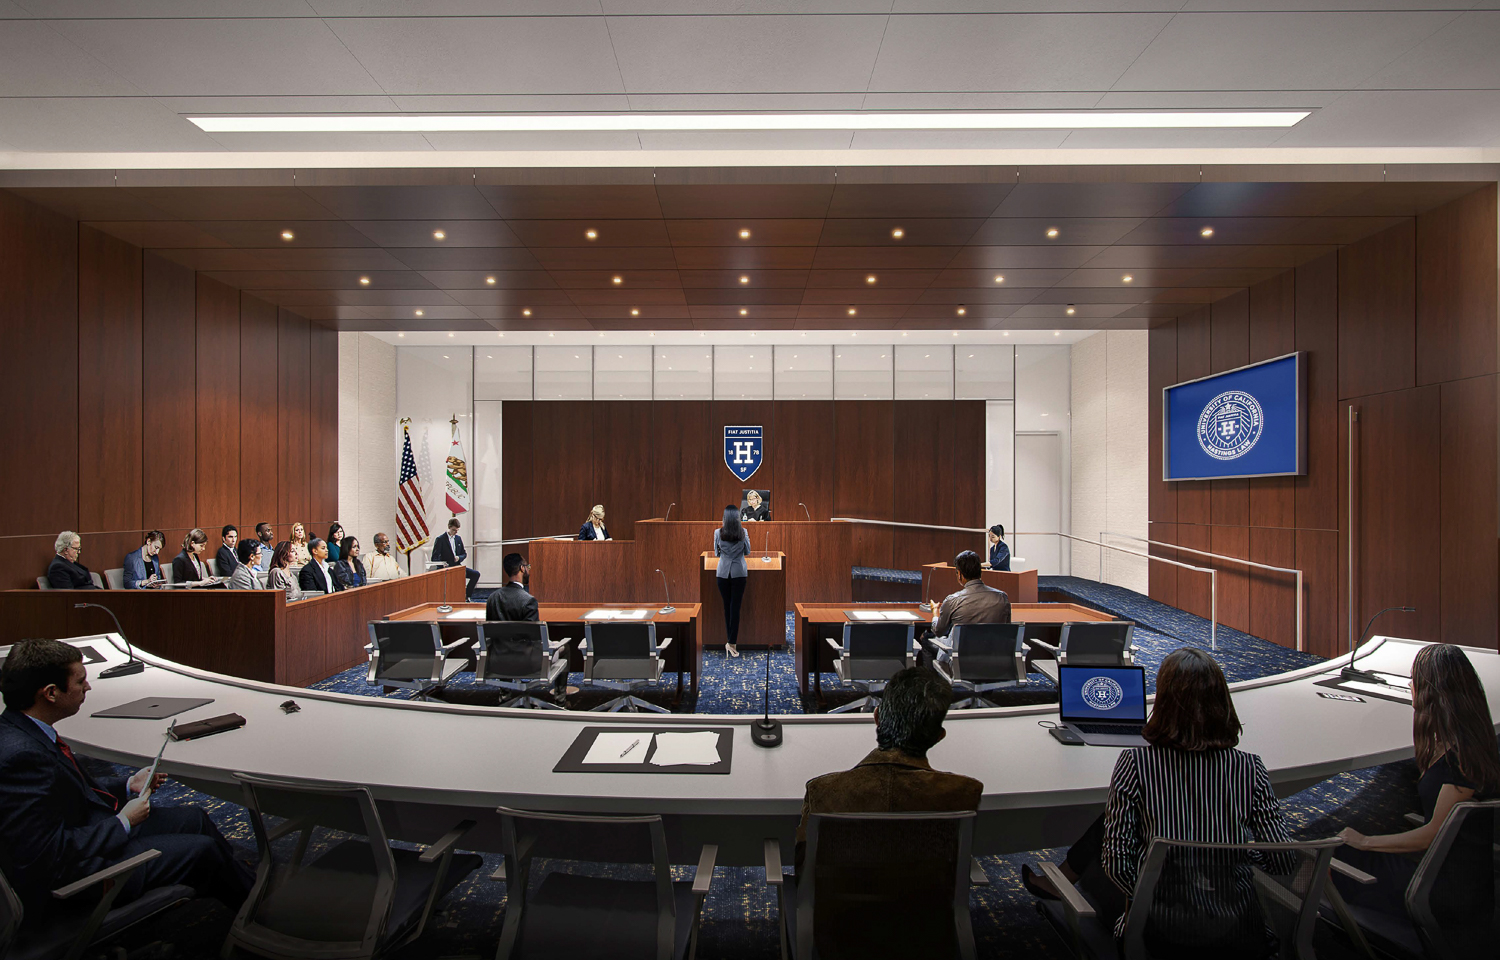 Academic Village specter courtroom, rendering courtesy UC Hastings Law, architecture by Perkins&Will